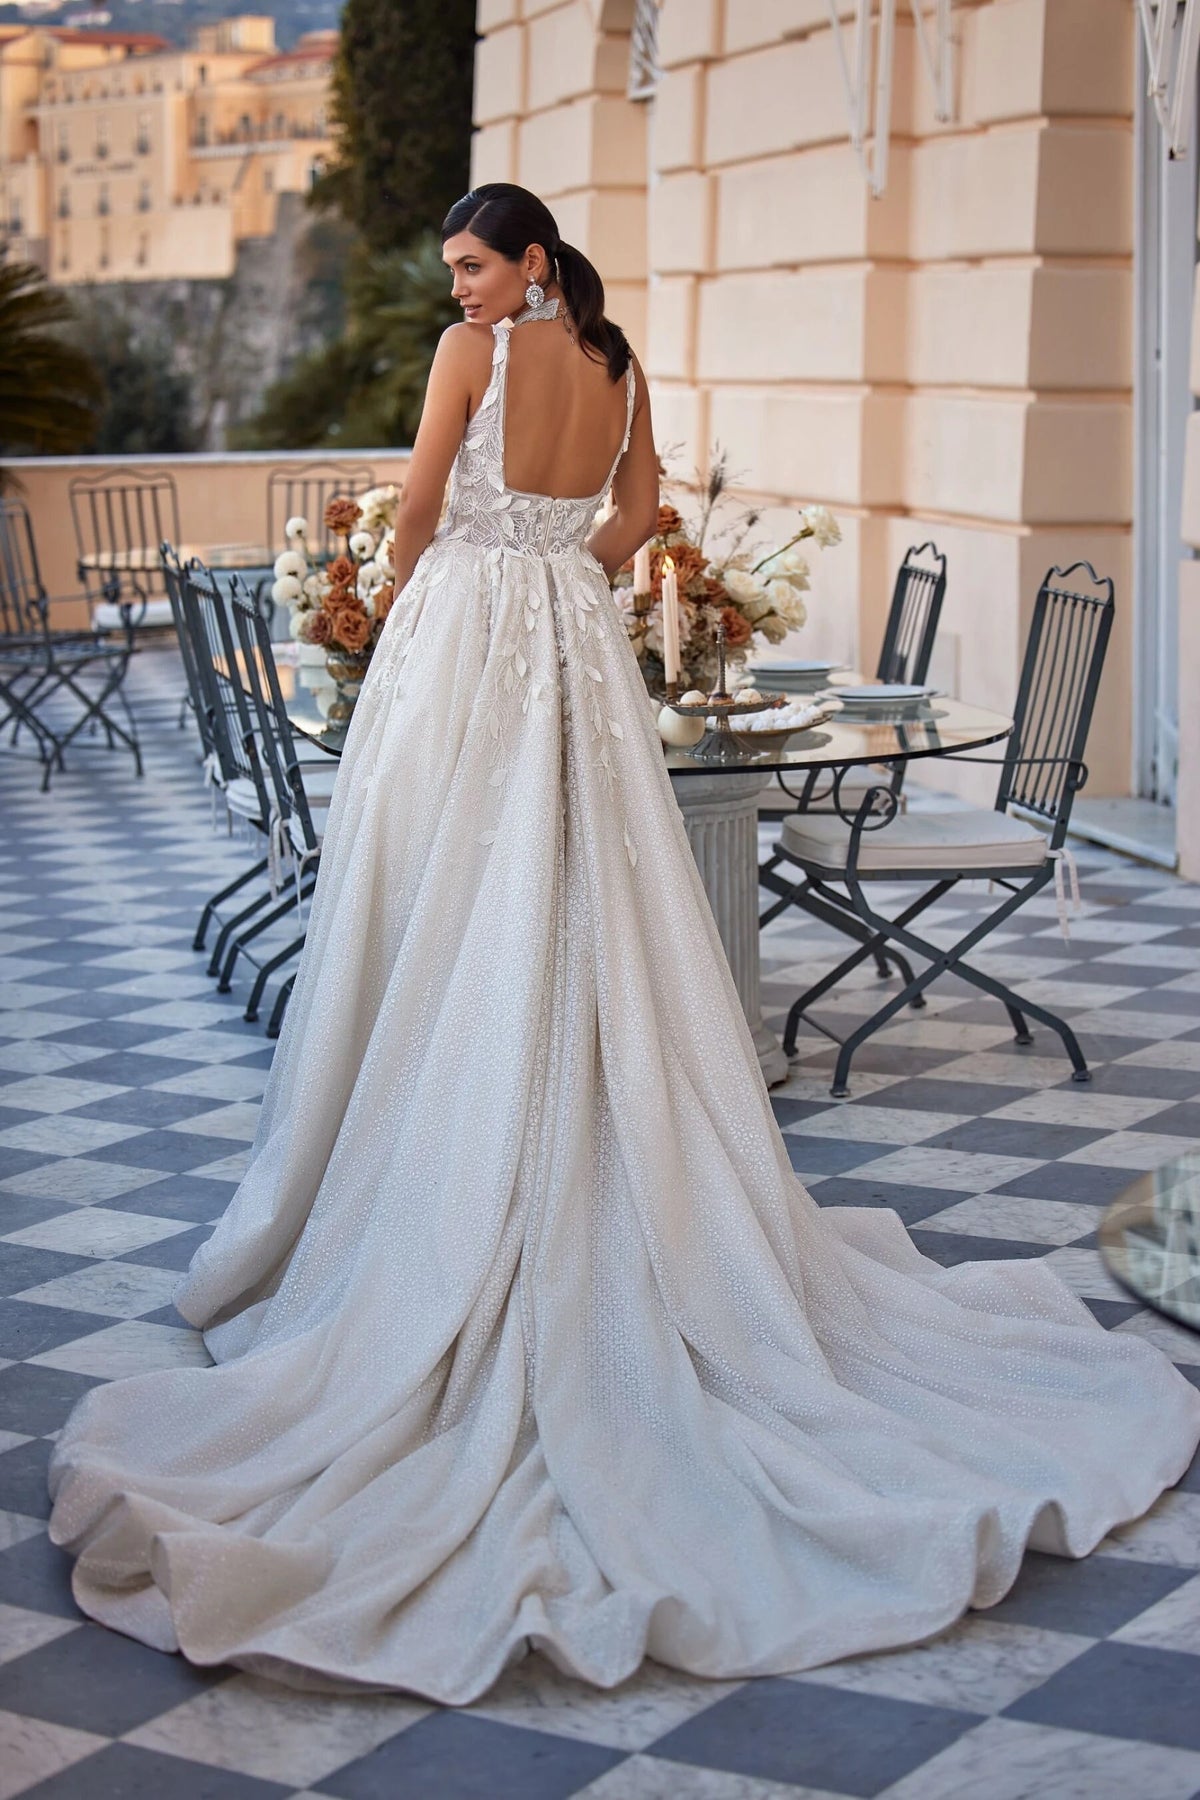 Full Pleated Aline Silhouette Wedding Dress Bridal Gown Sparkle Square Neckline Sleeveless with Straps Open Square Back